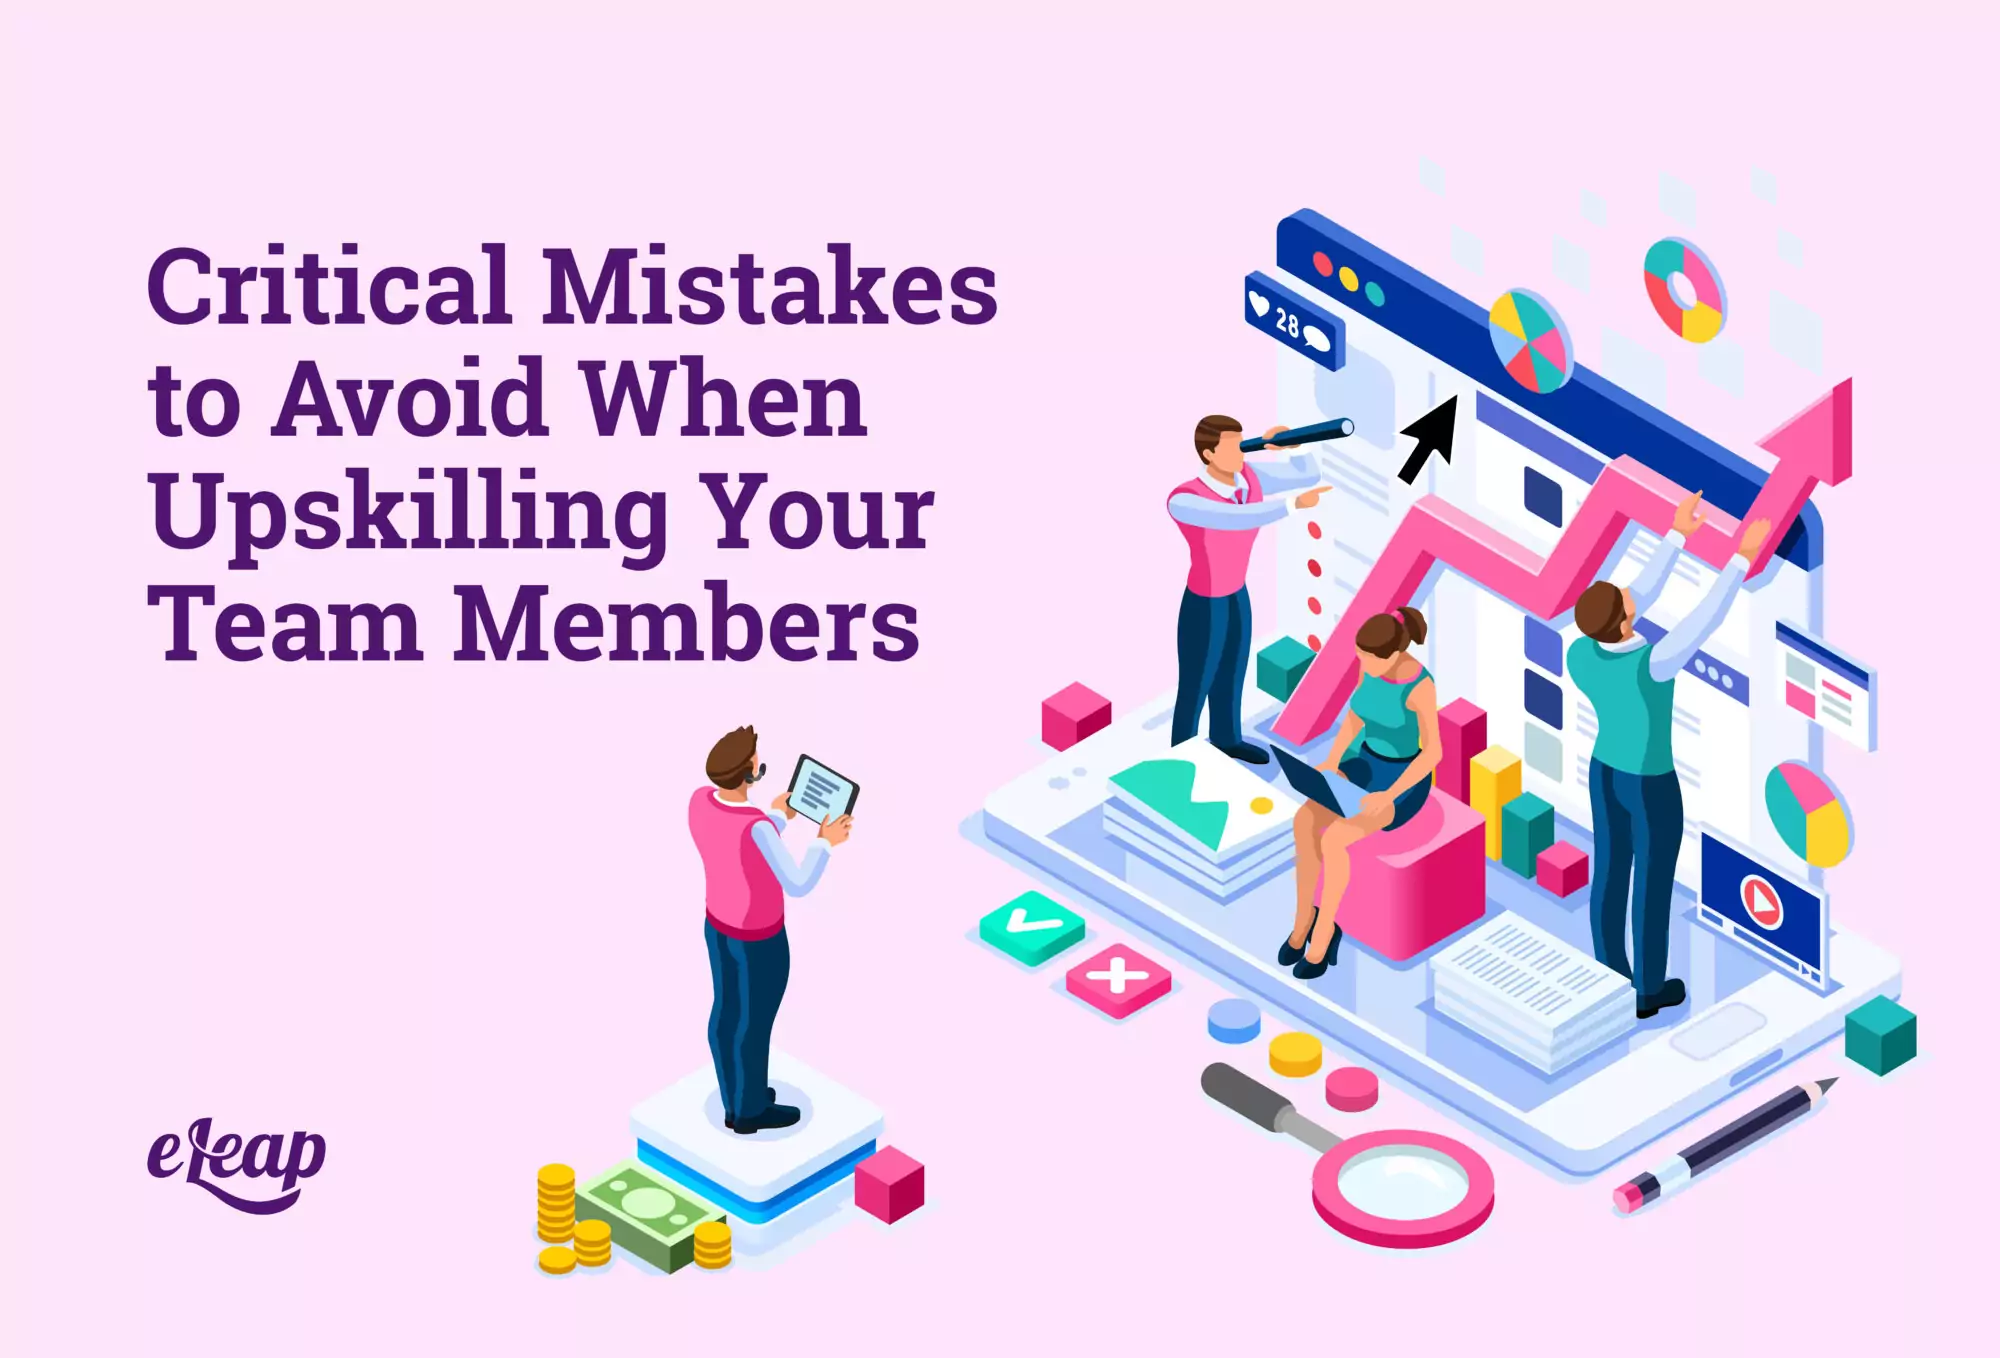  Critical Mistakes to Avoid When Upskilling Your Team Members 